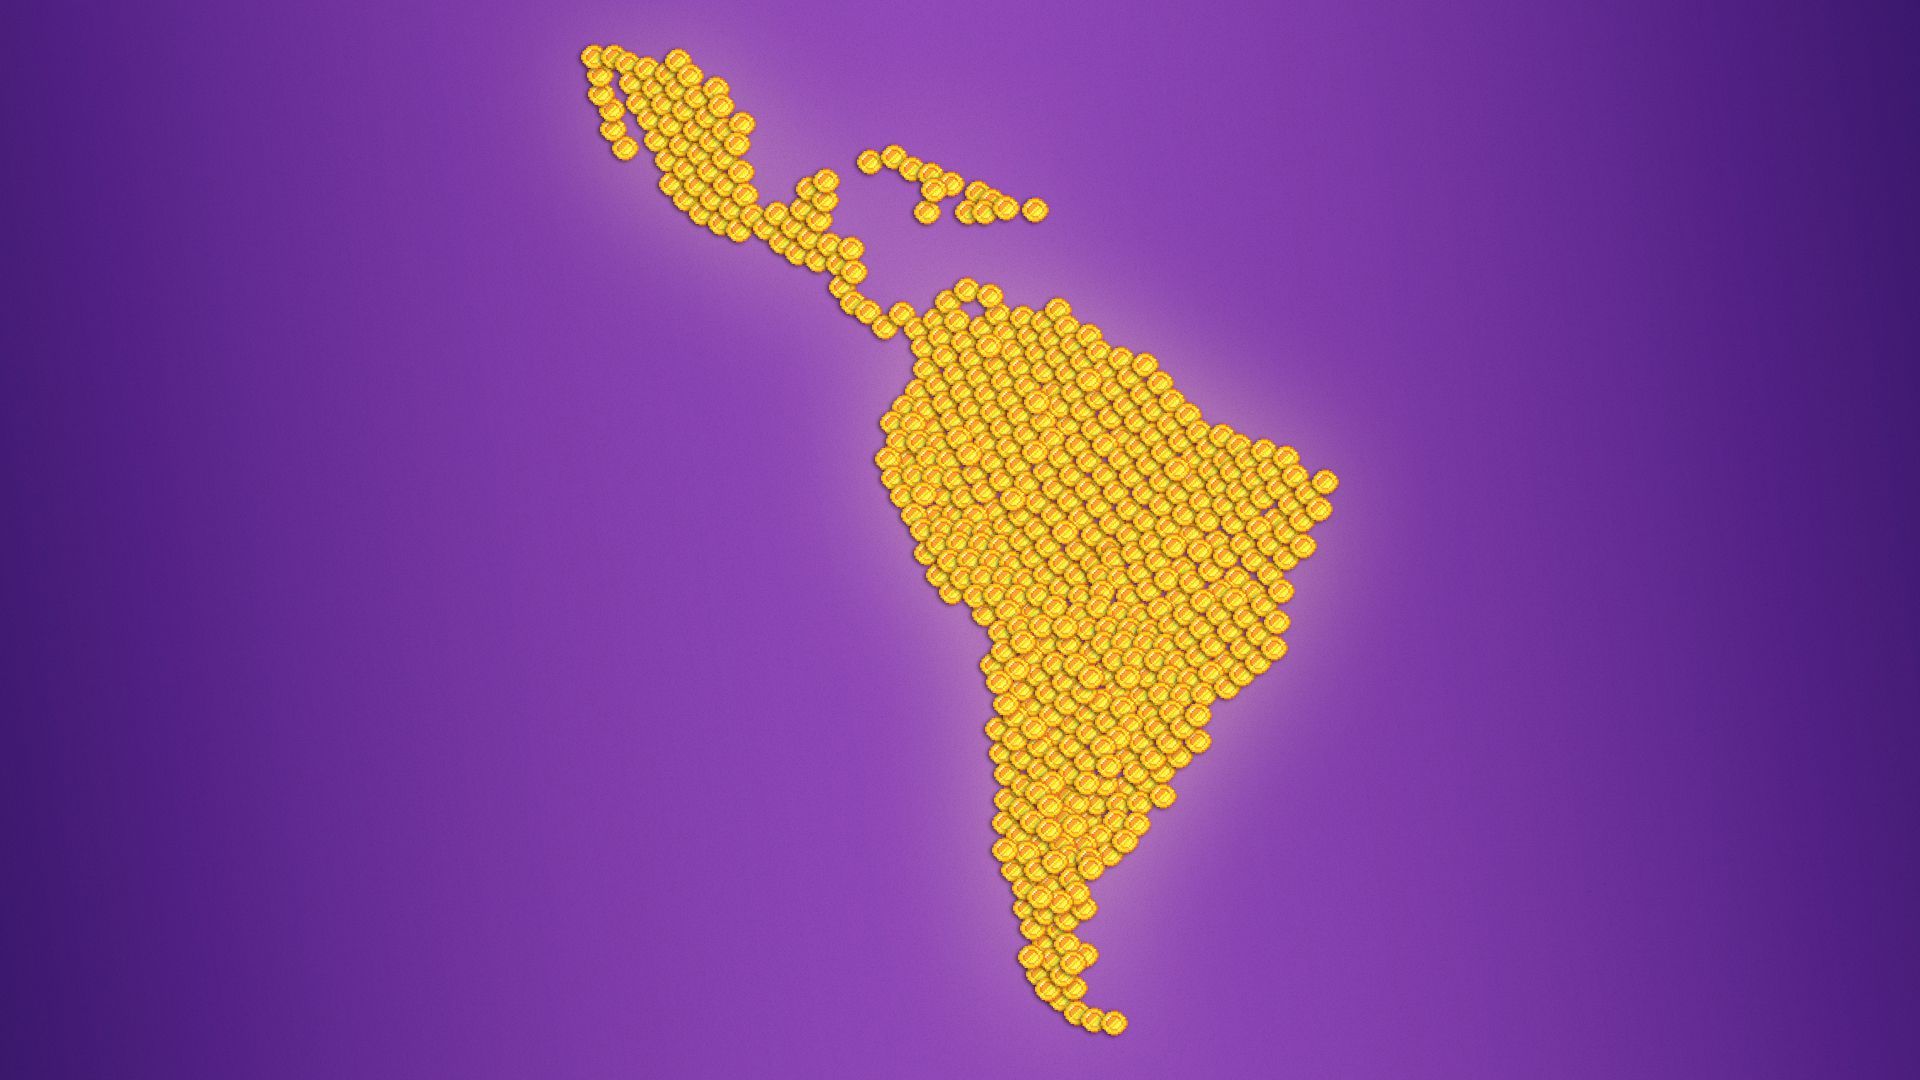 Illustration of coins arranged in the shape of Latin America.